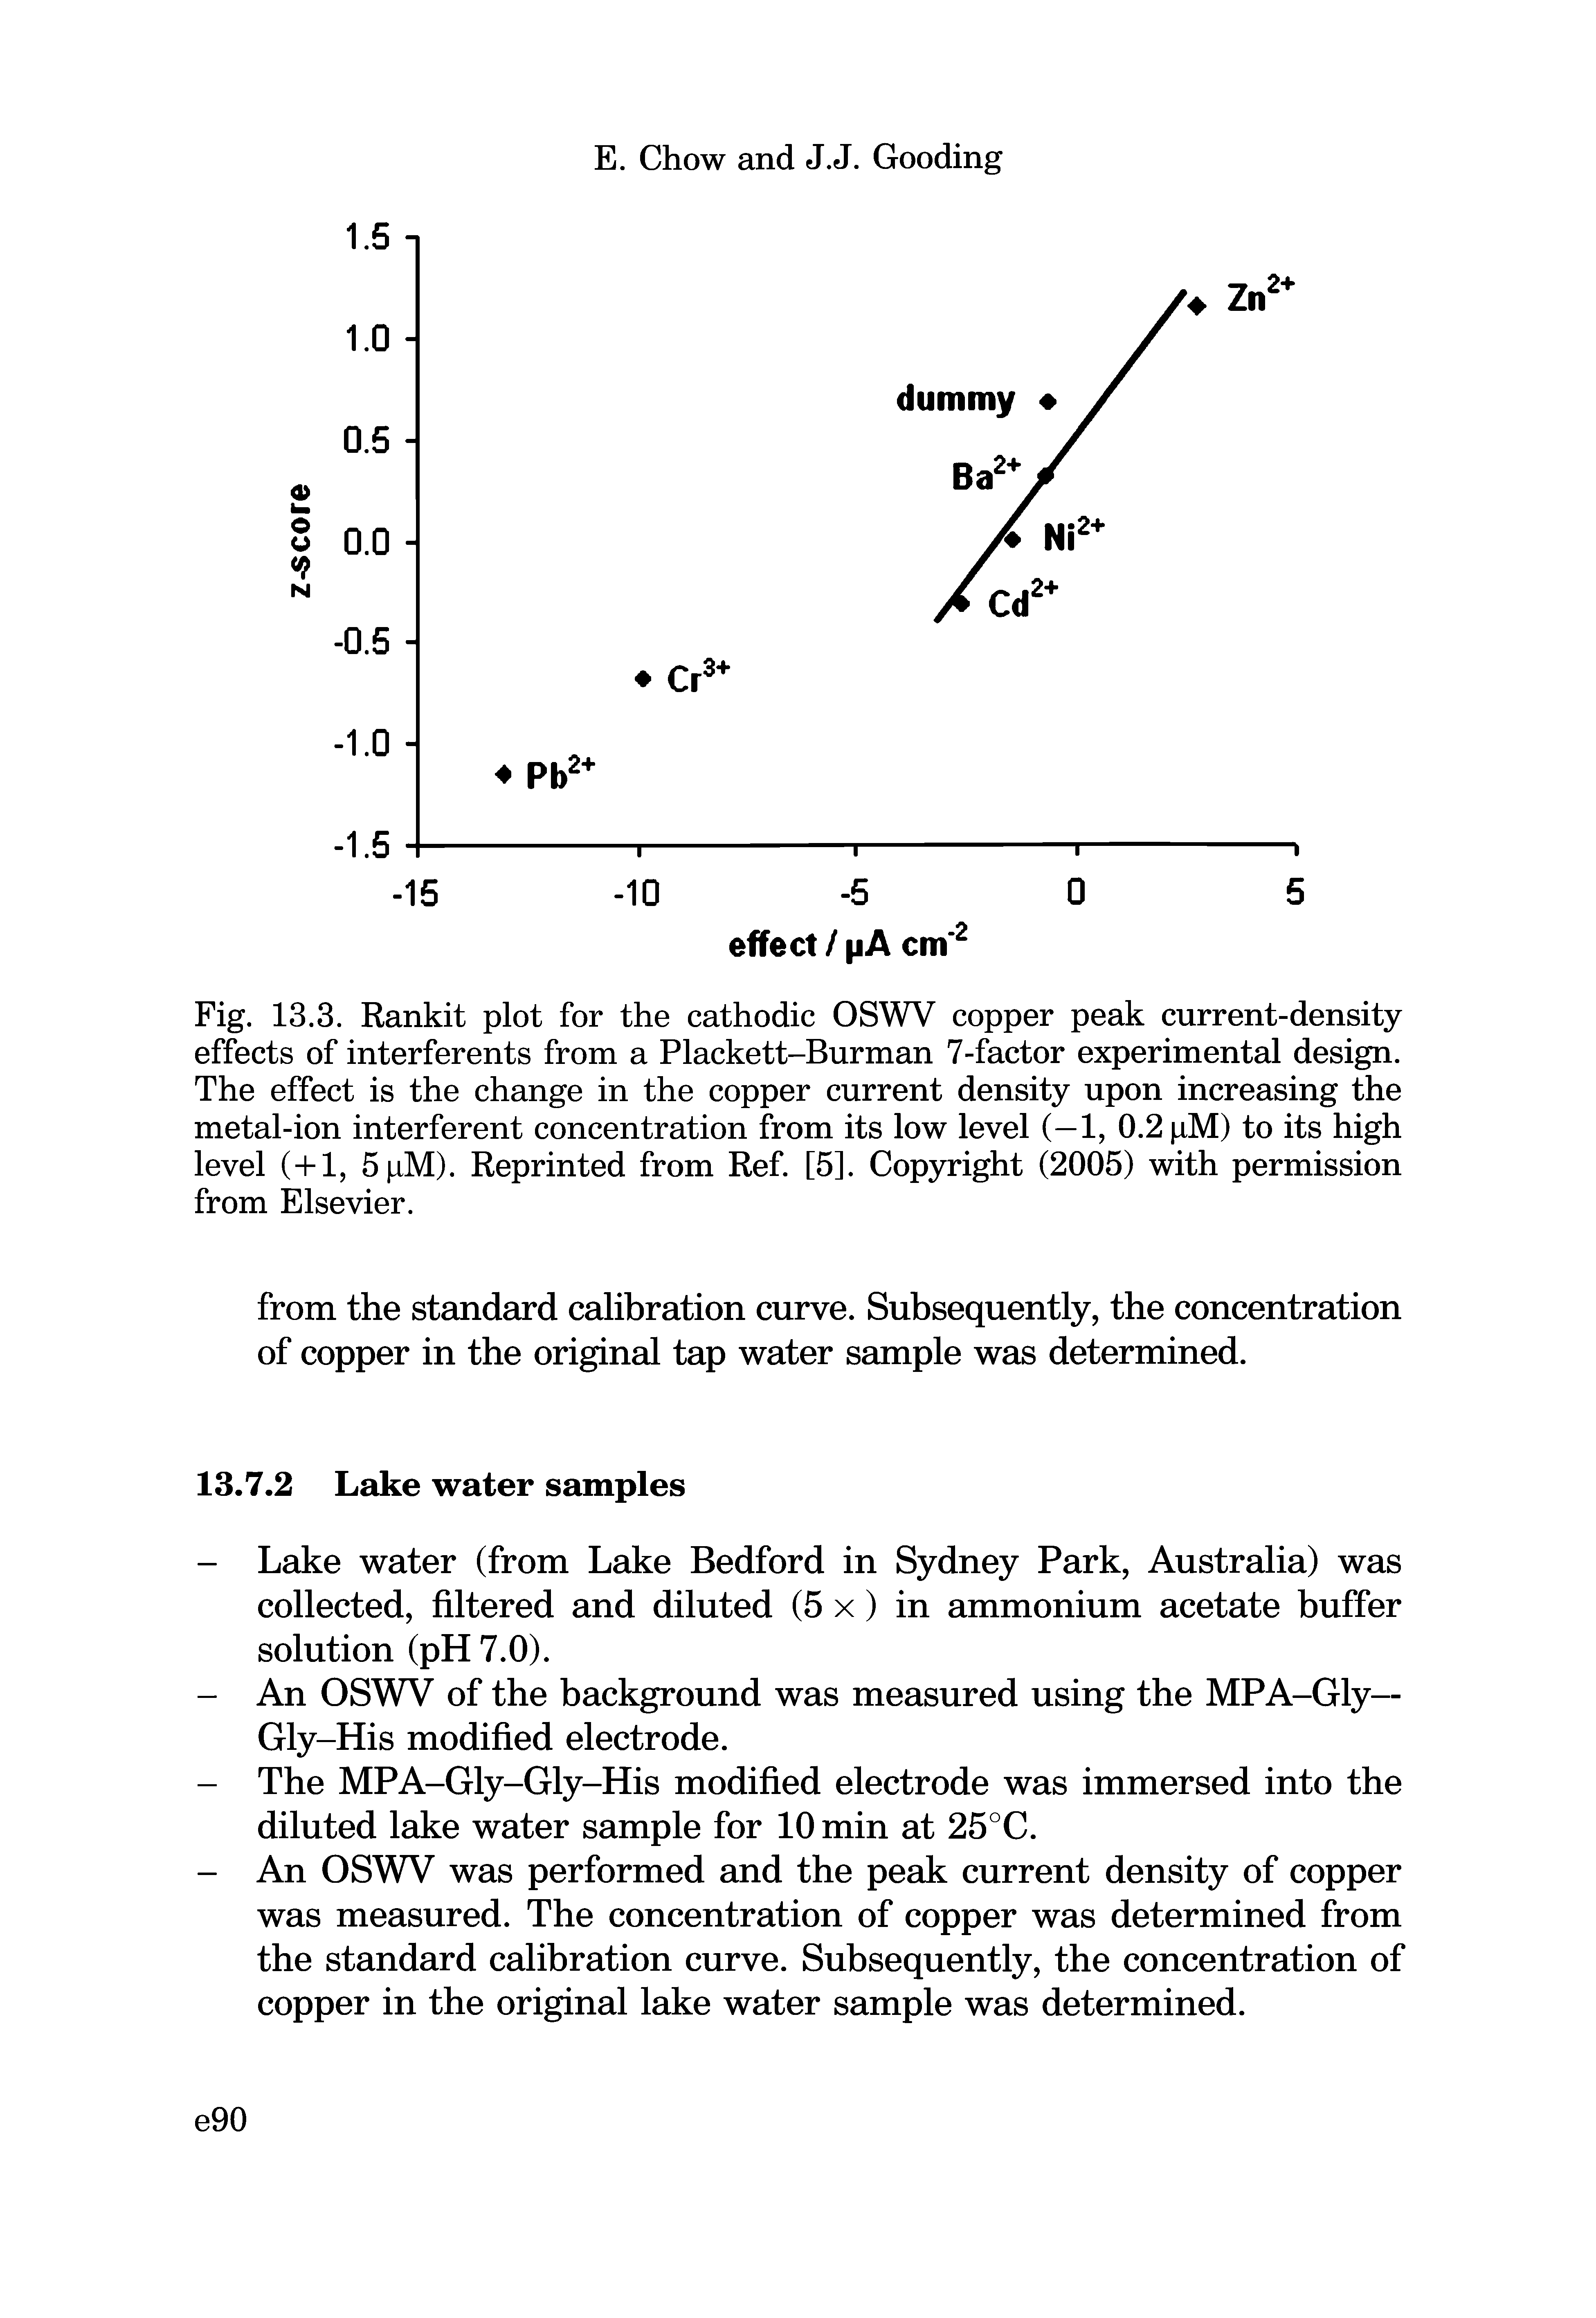 Fig. 13.3. Rankit plot for the cathodic OSWV copper peak current-density effects of interferents from a Plackett-Burman 7-factor experimental design. The effect is the change in the copper current density upon increasing the metal-ion interferent concentration from its low level (—1, 0.2 pM) to its high level (+1, 5pM). Reprinted from Ref. [5], Copyright (2005) with permission from Elsevier.